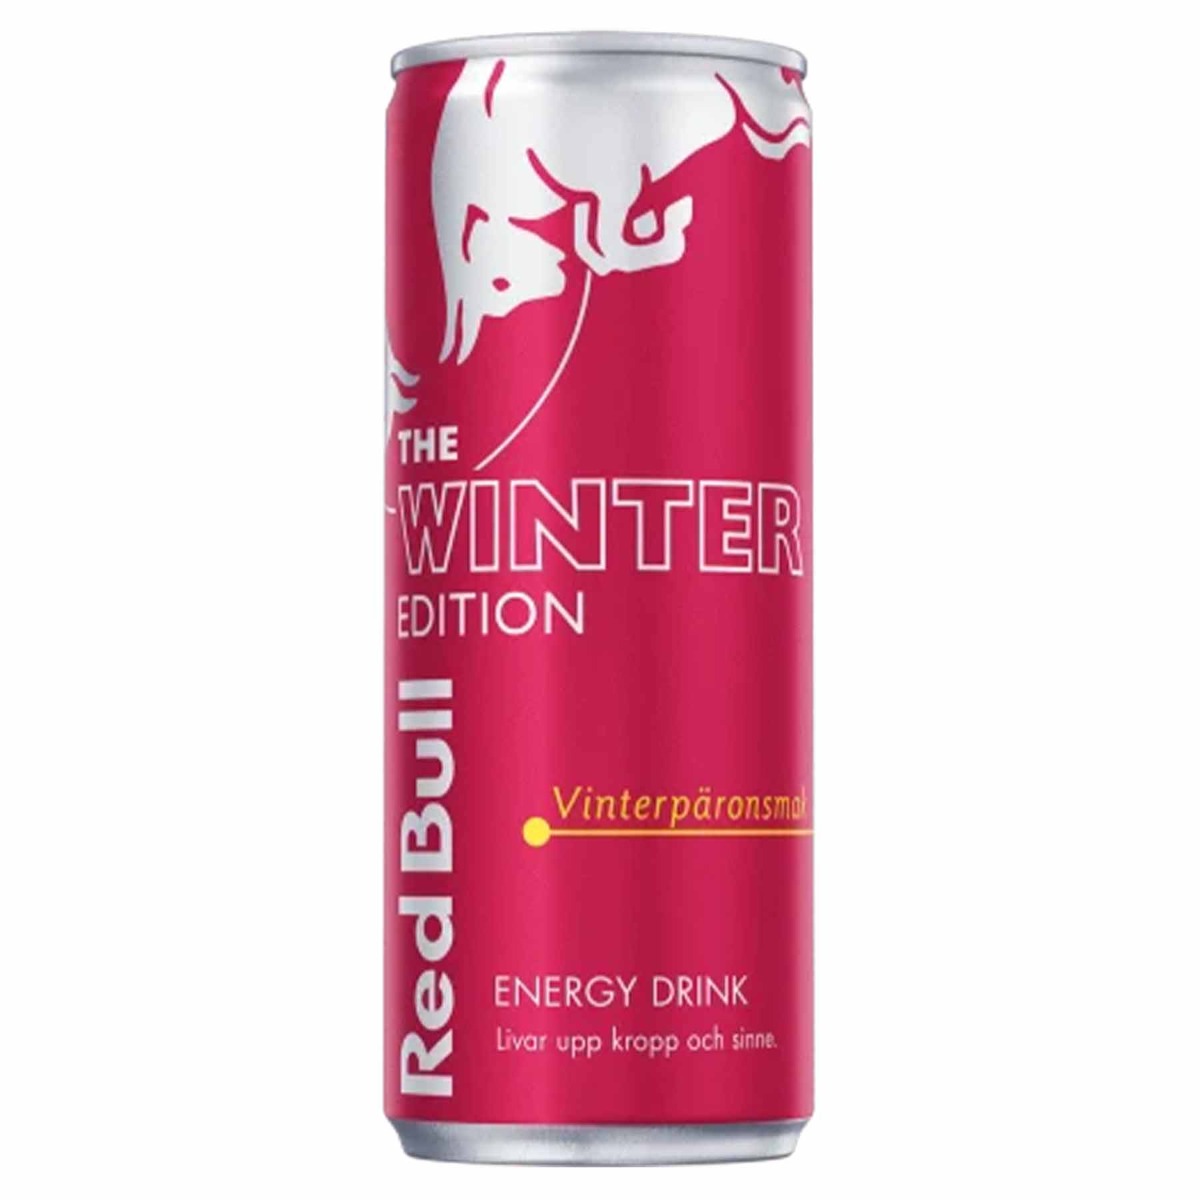 Energidryck, Red Bull winter edition 25 cl